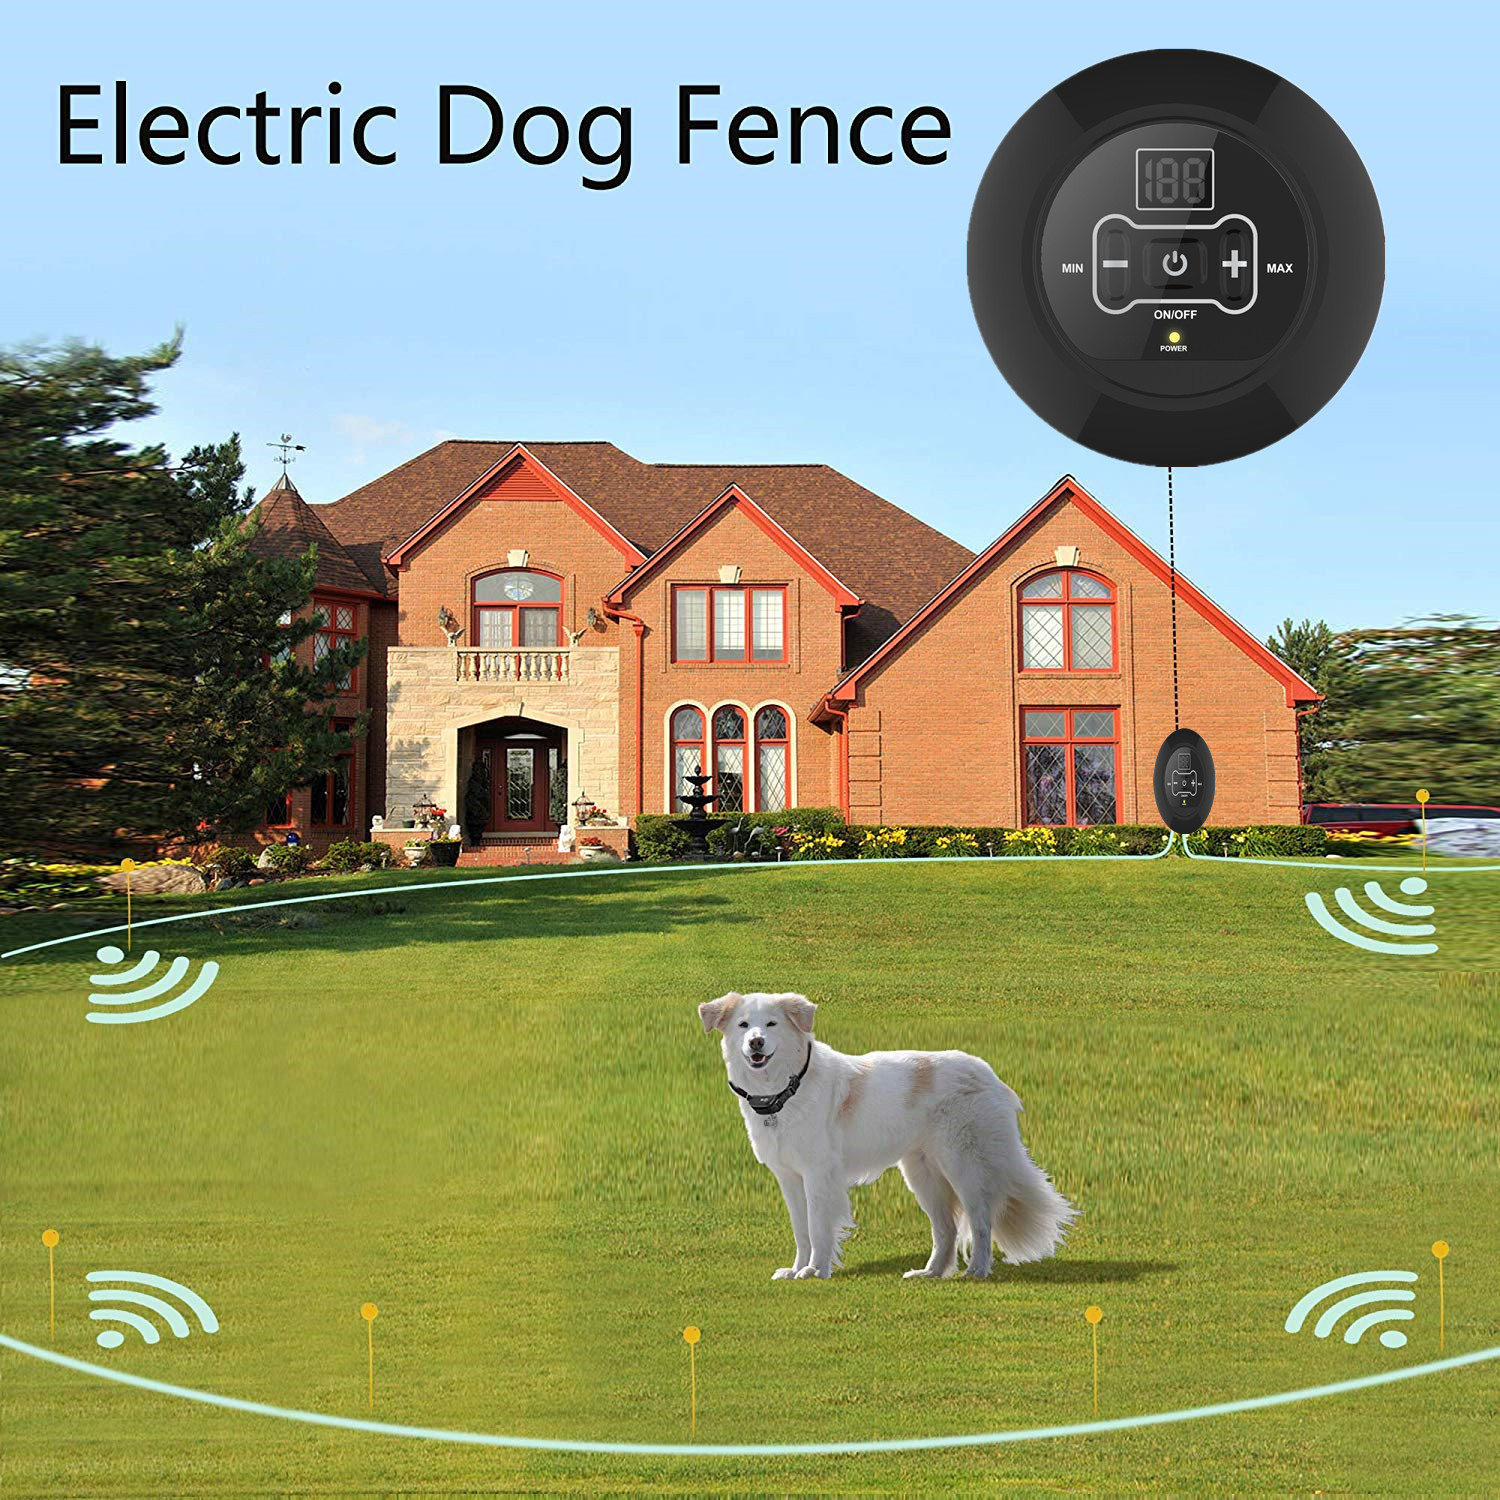 wireless pet dog fence containment system waterproof shock transmitter collar manual